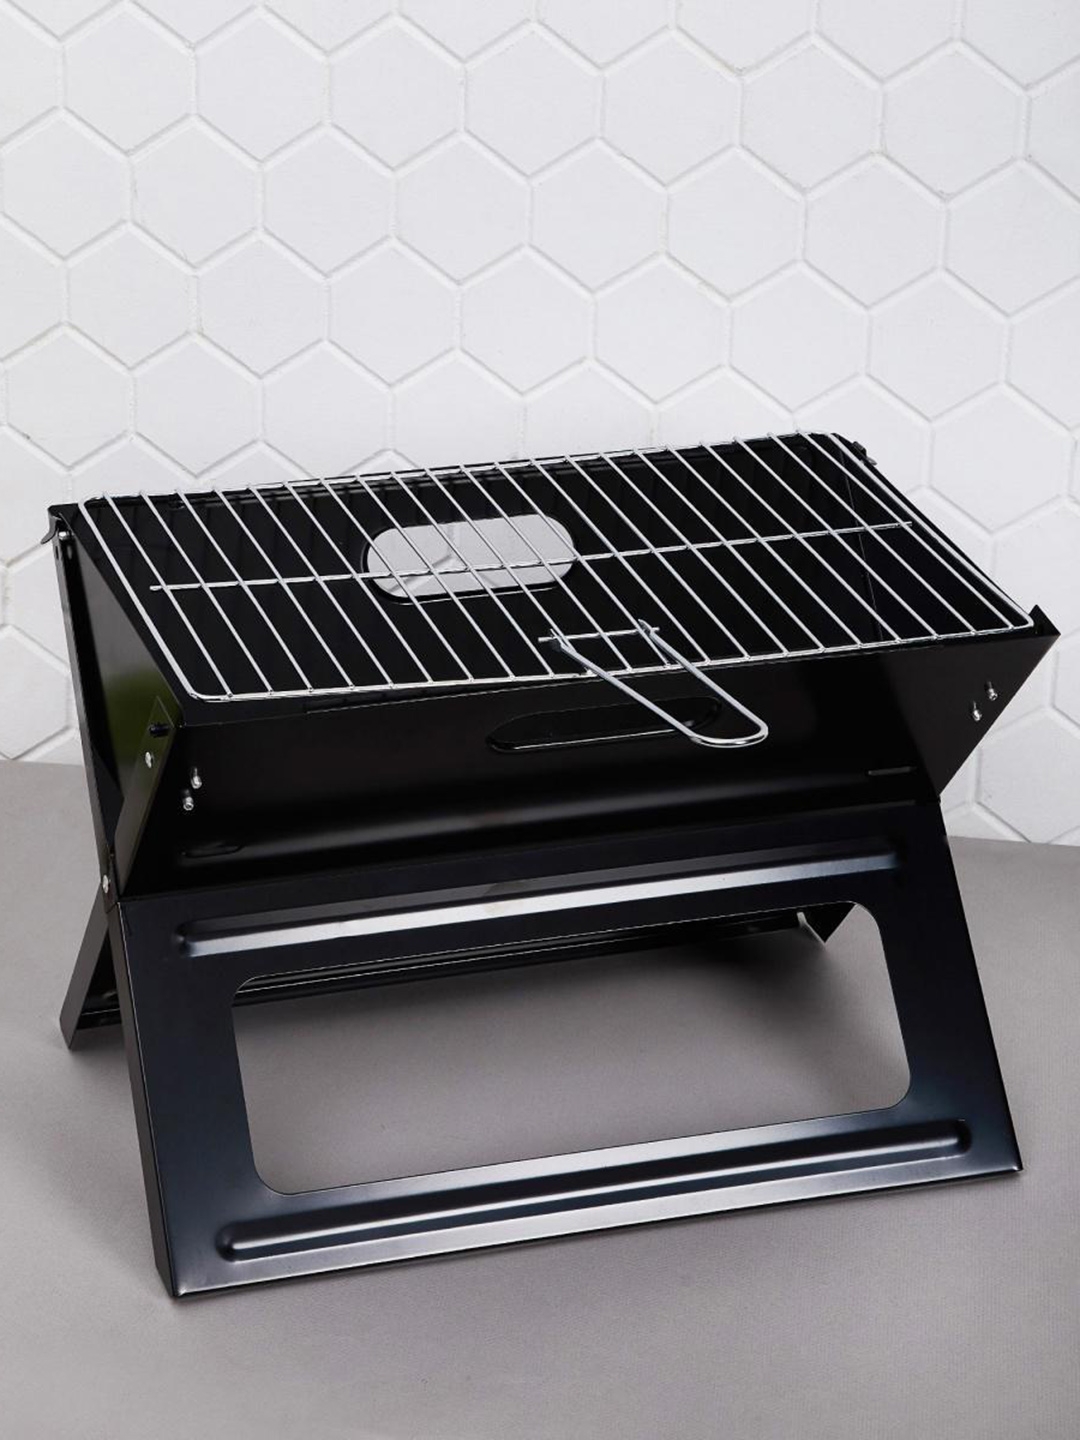 Home Centre Black Solid Truffels-Windsor Barbeque Grill